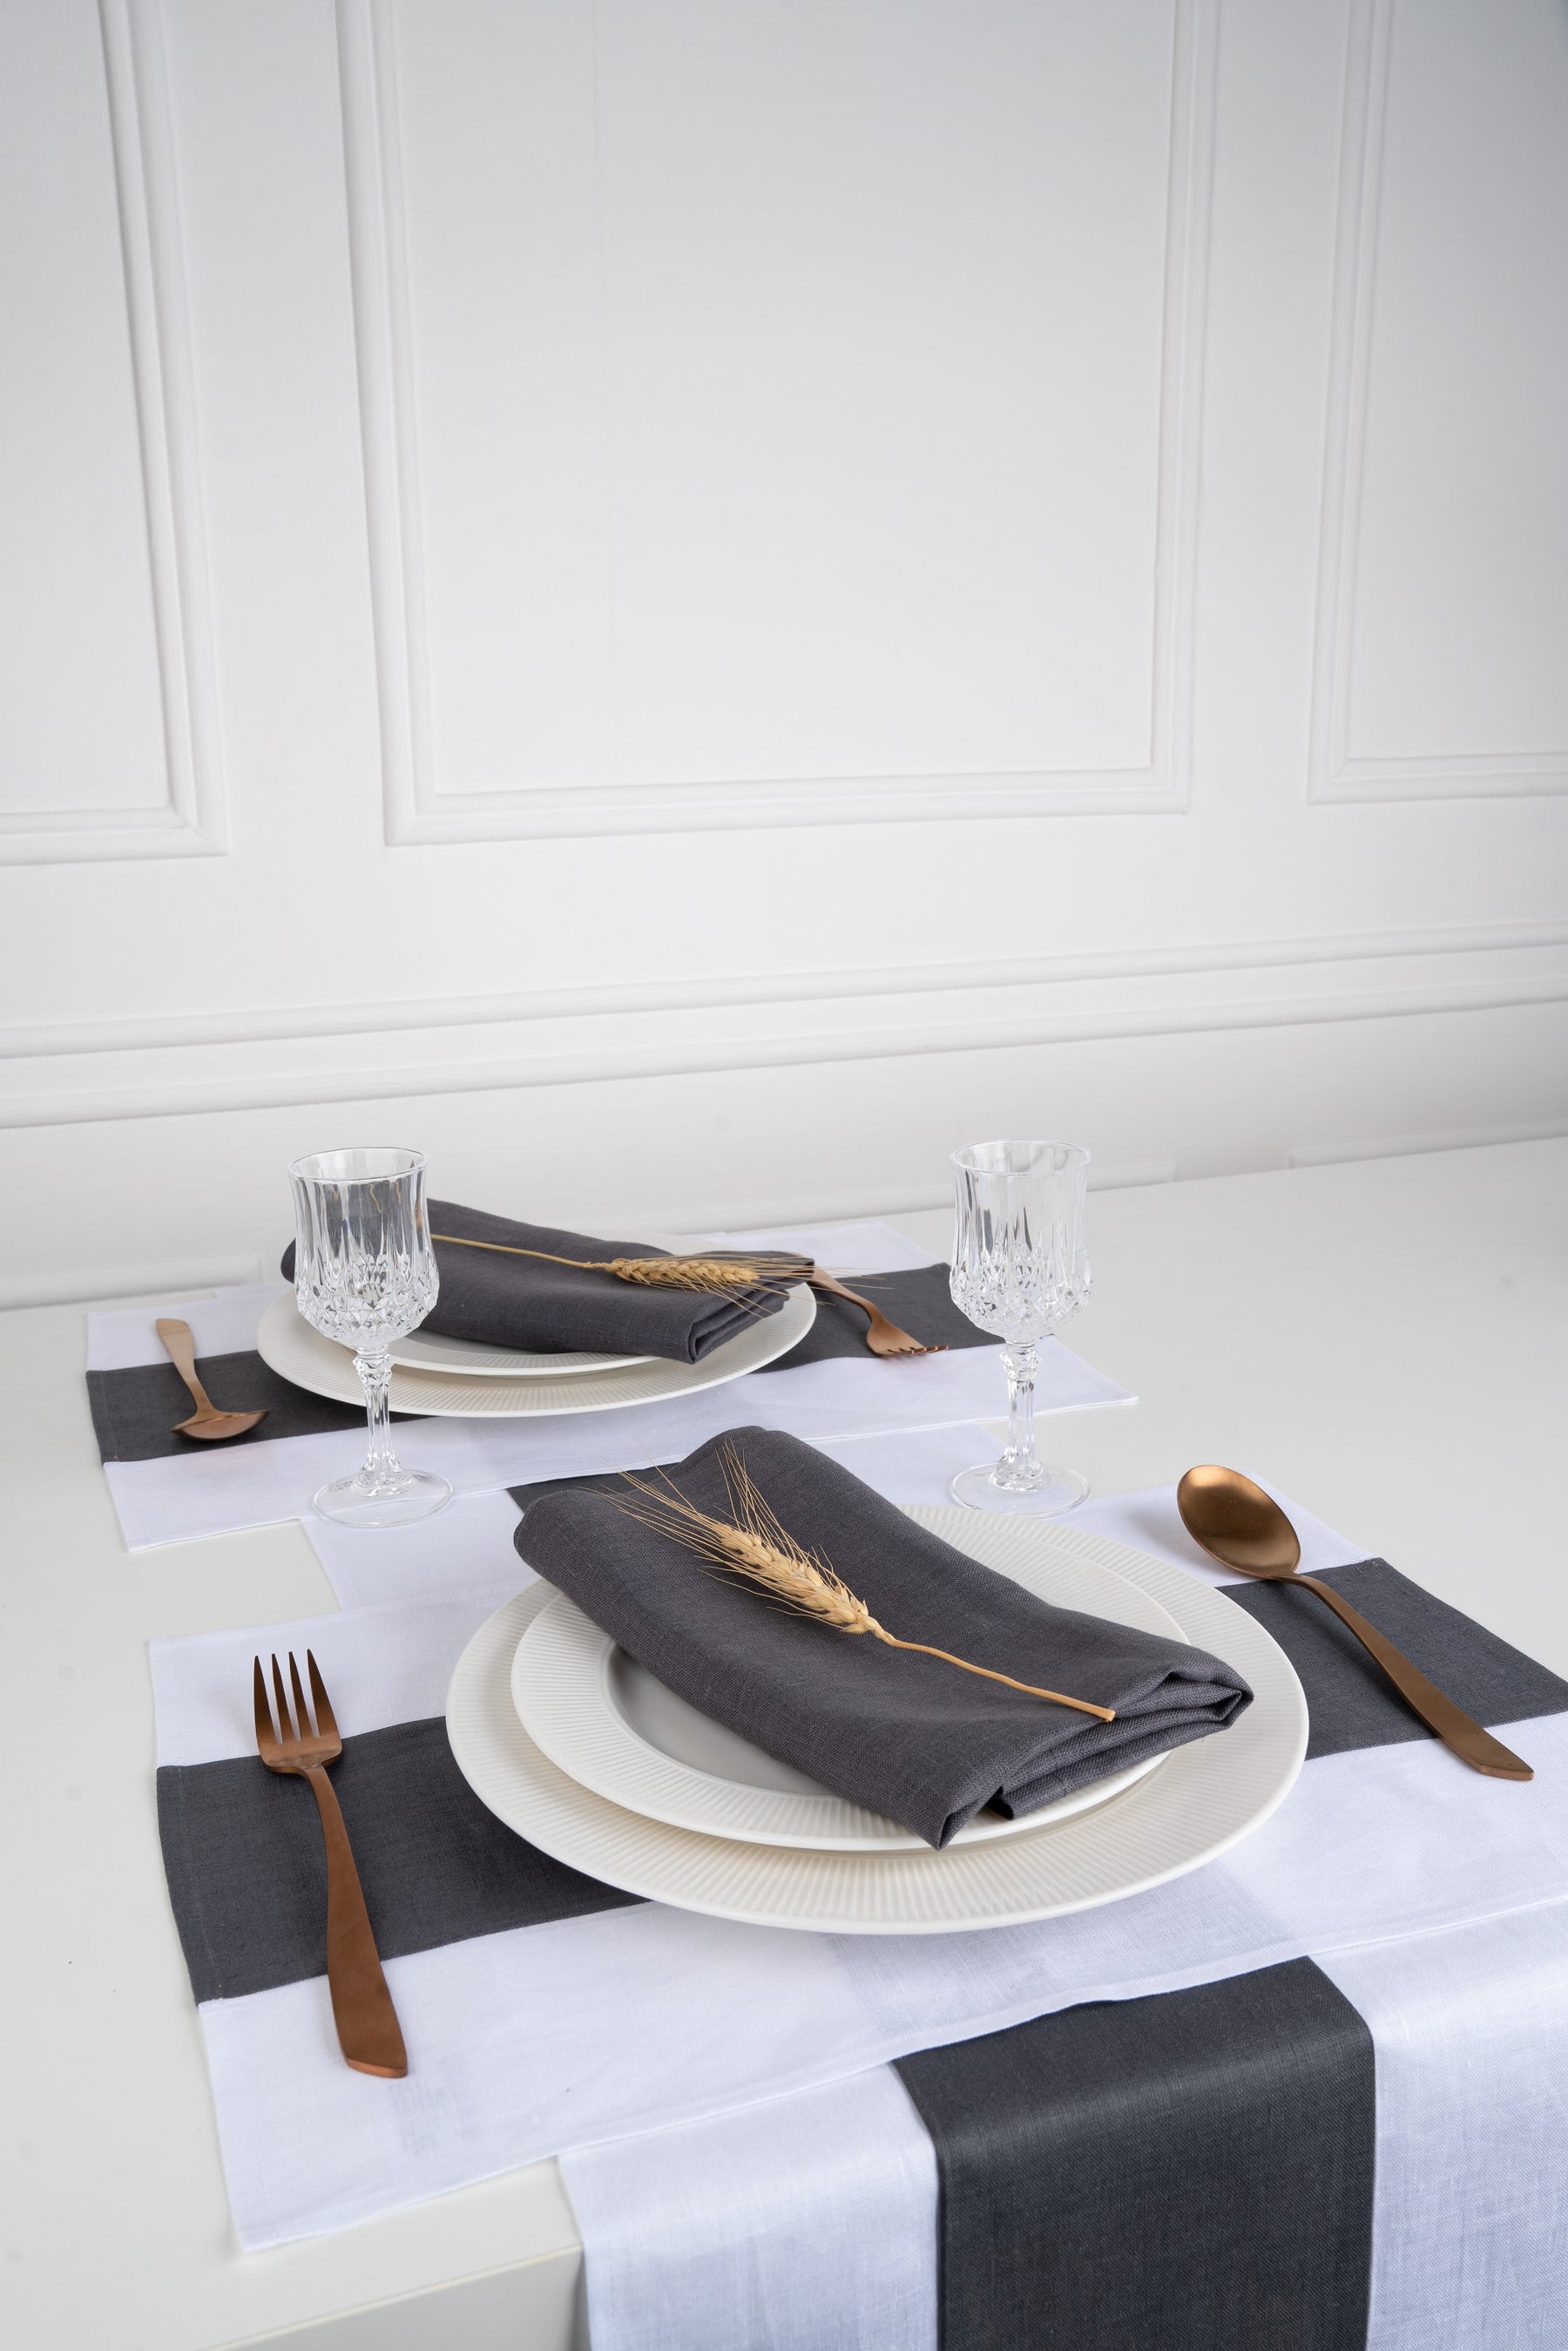 Splicing Linen Placemat - White and Charcoal Grey